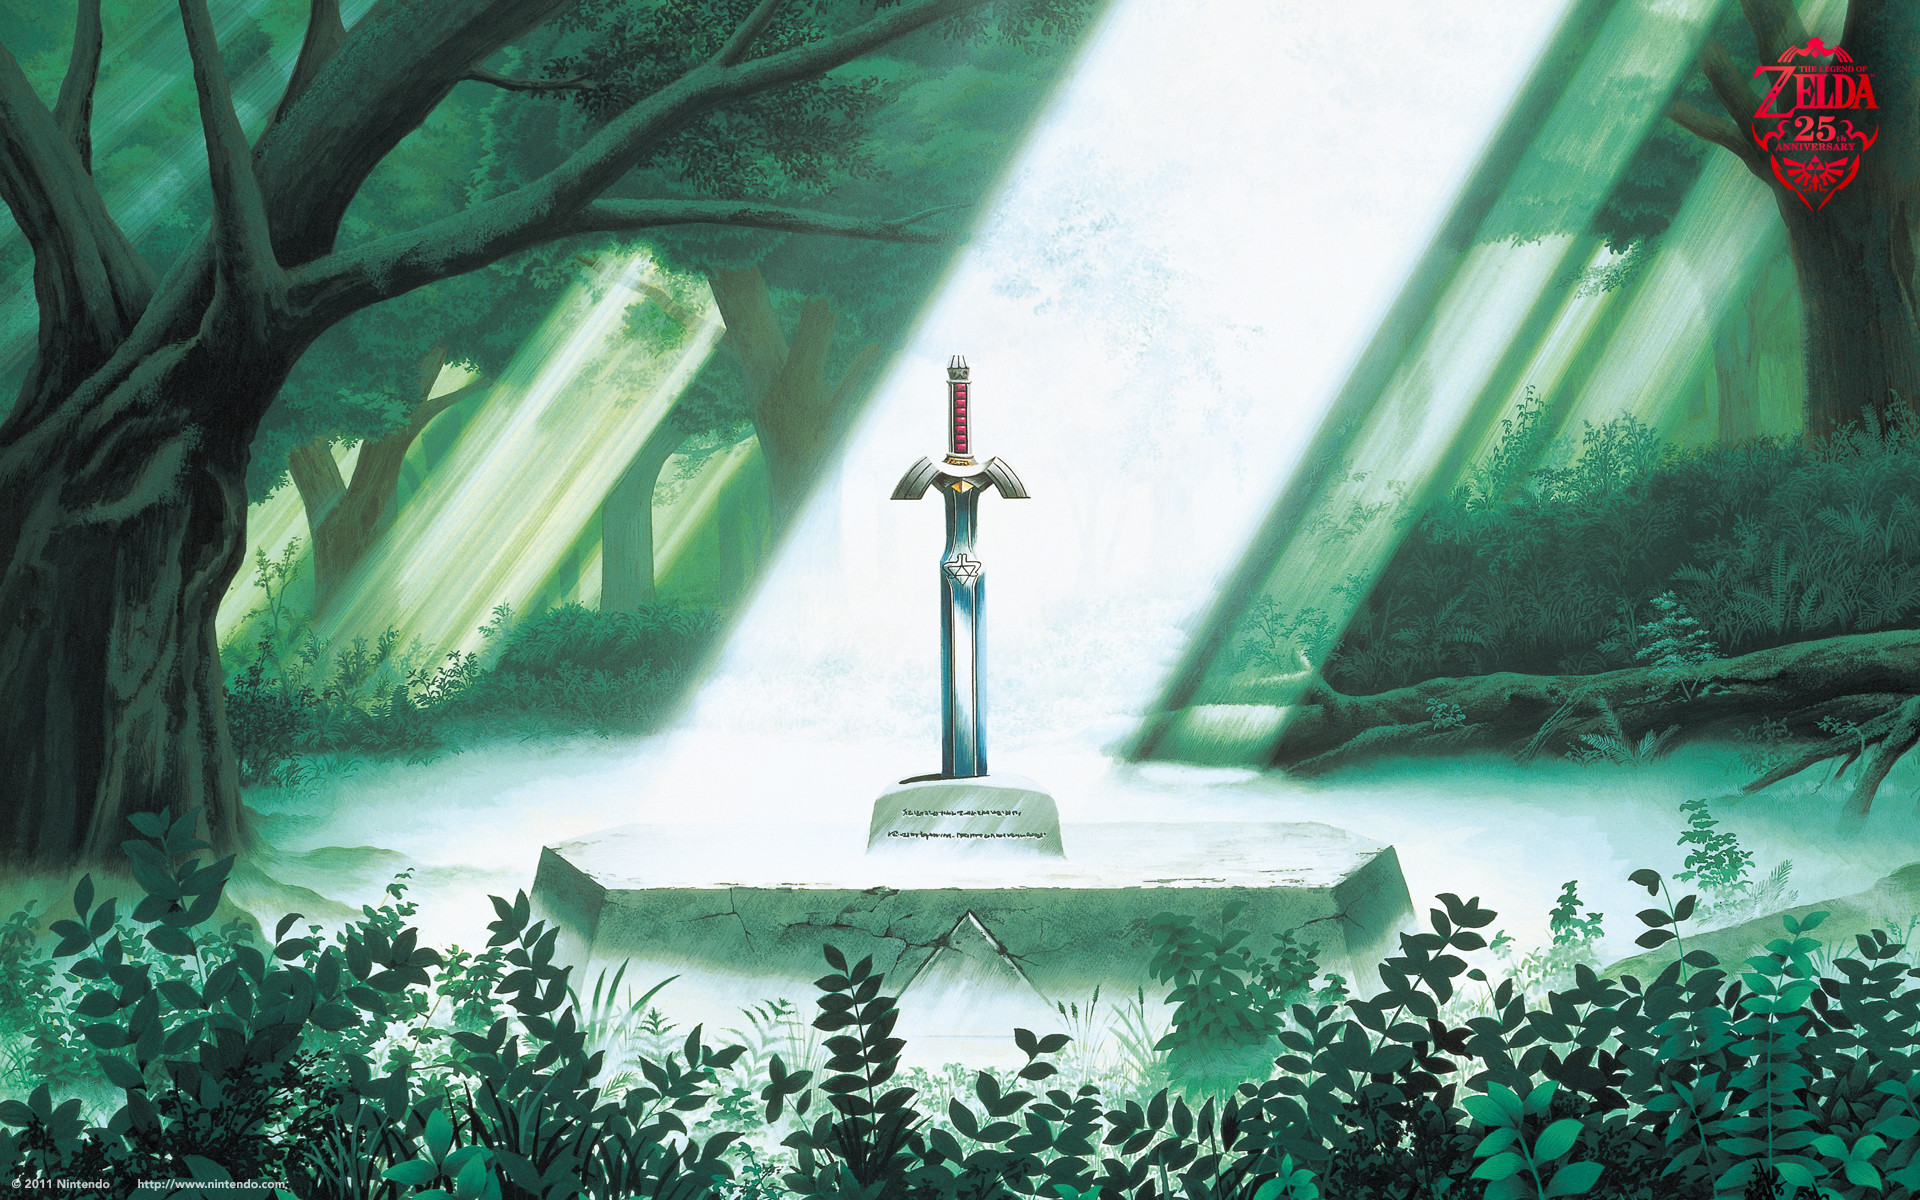 1920x1200 The Legend of Zelda Wallpaper (Link to the Past) - The Master Sword Rests